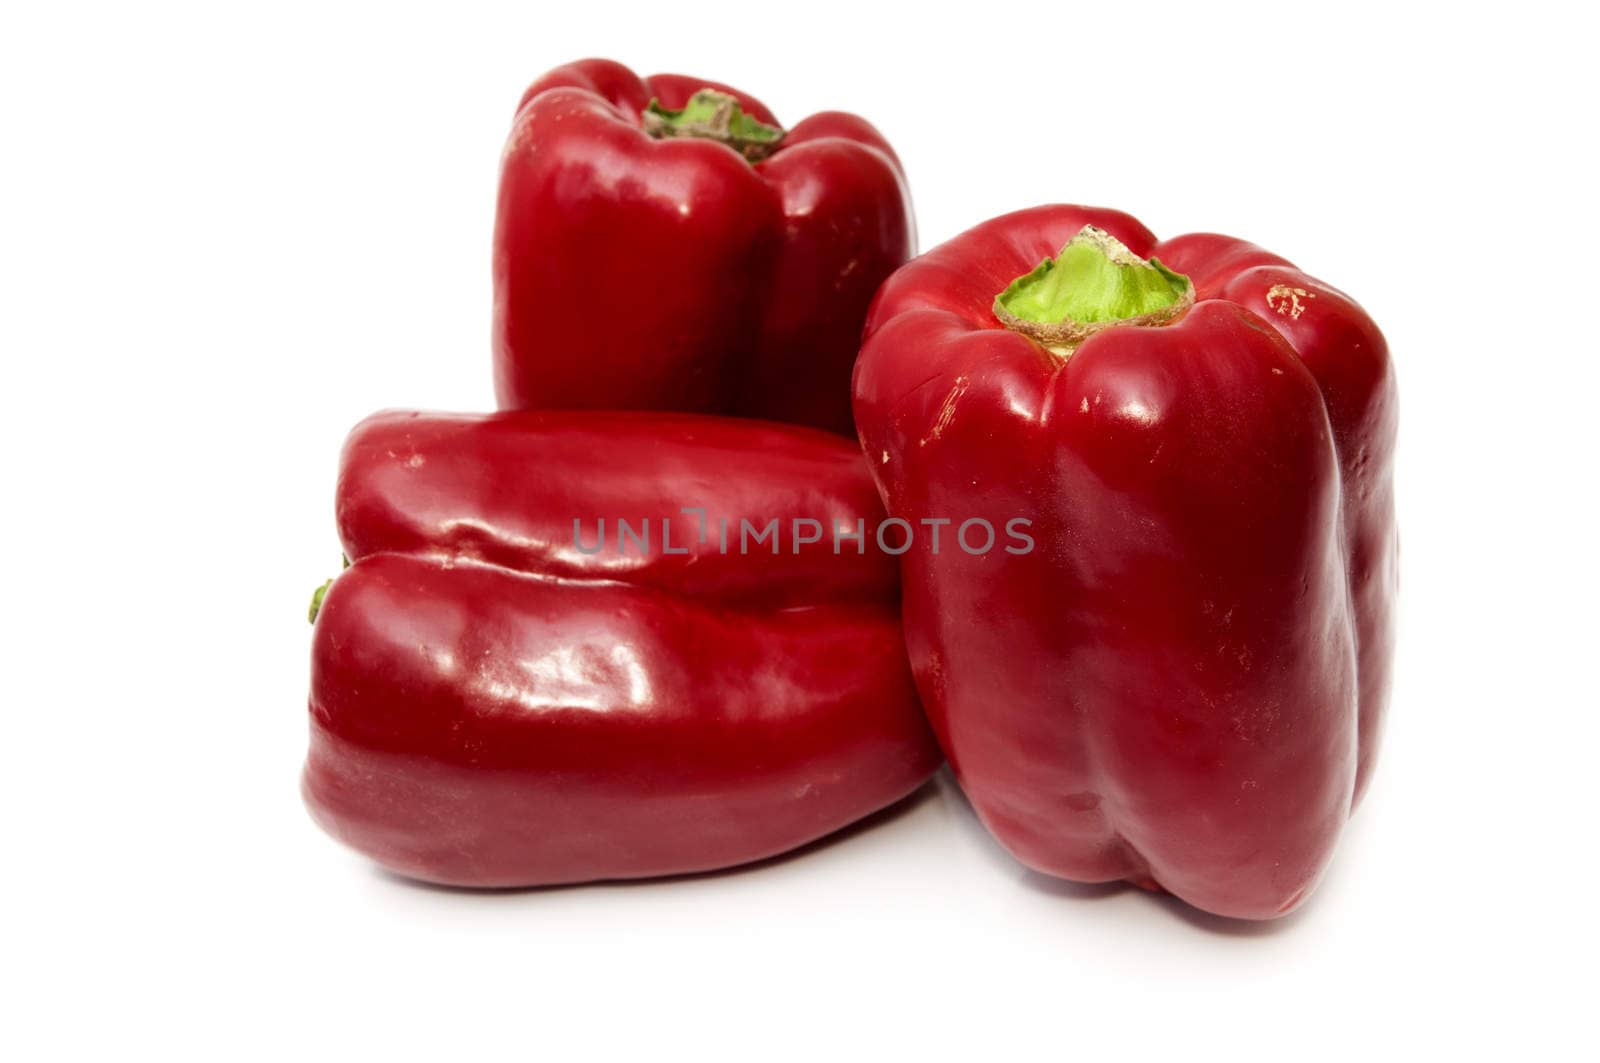 red peppers on a white background